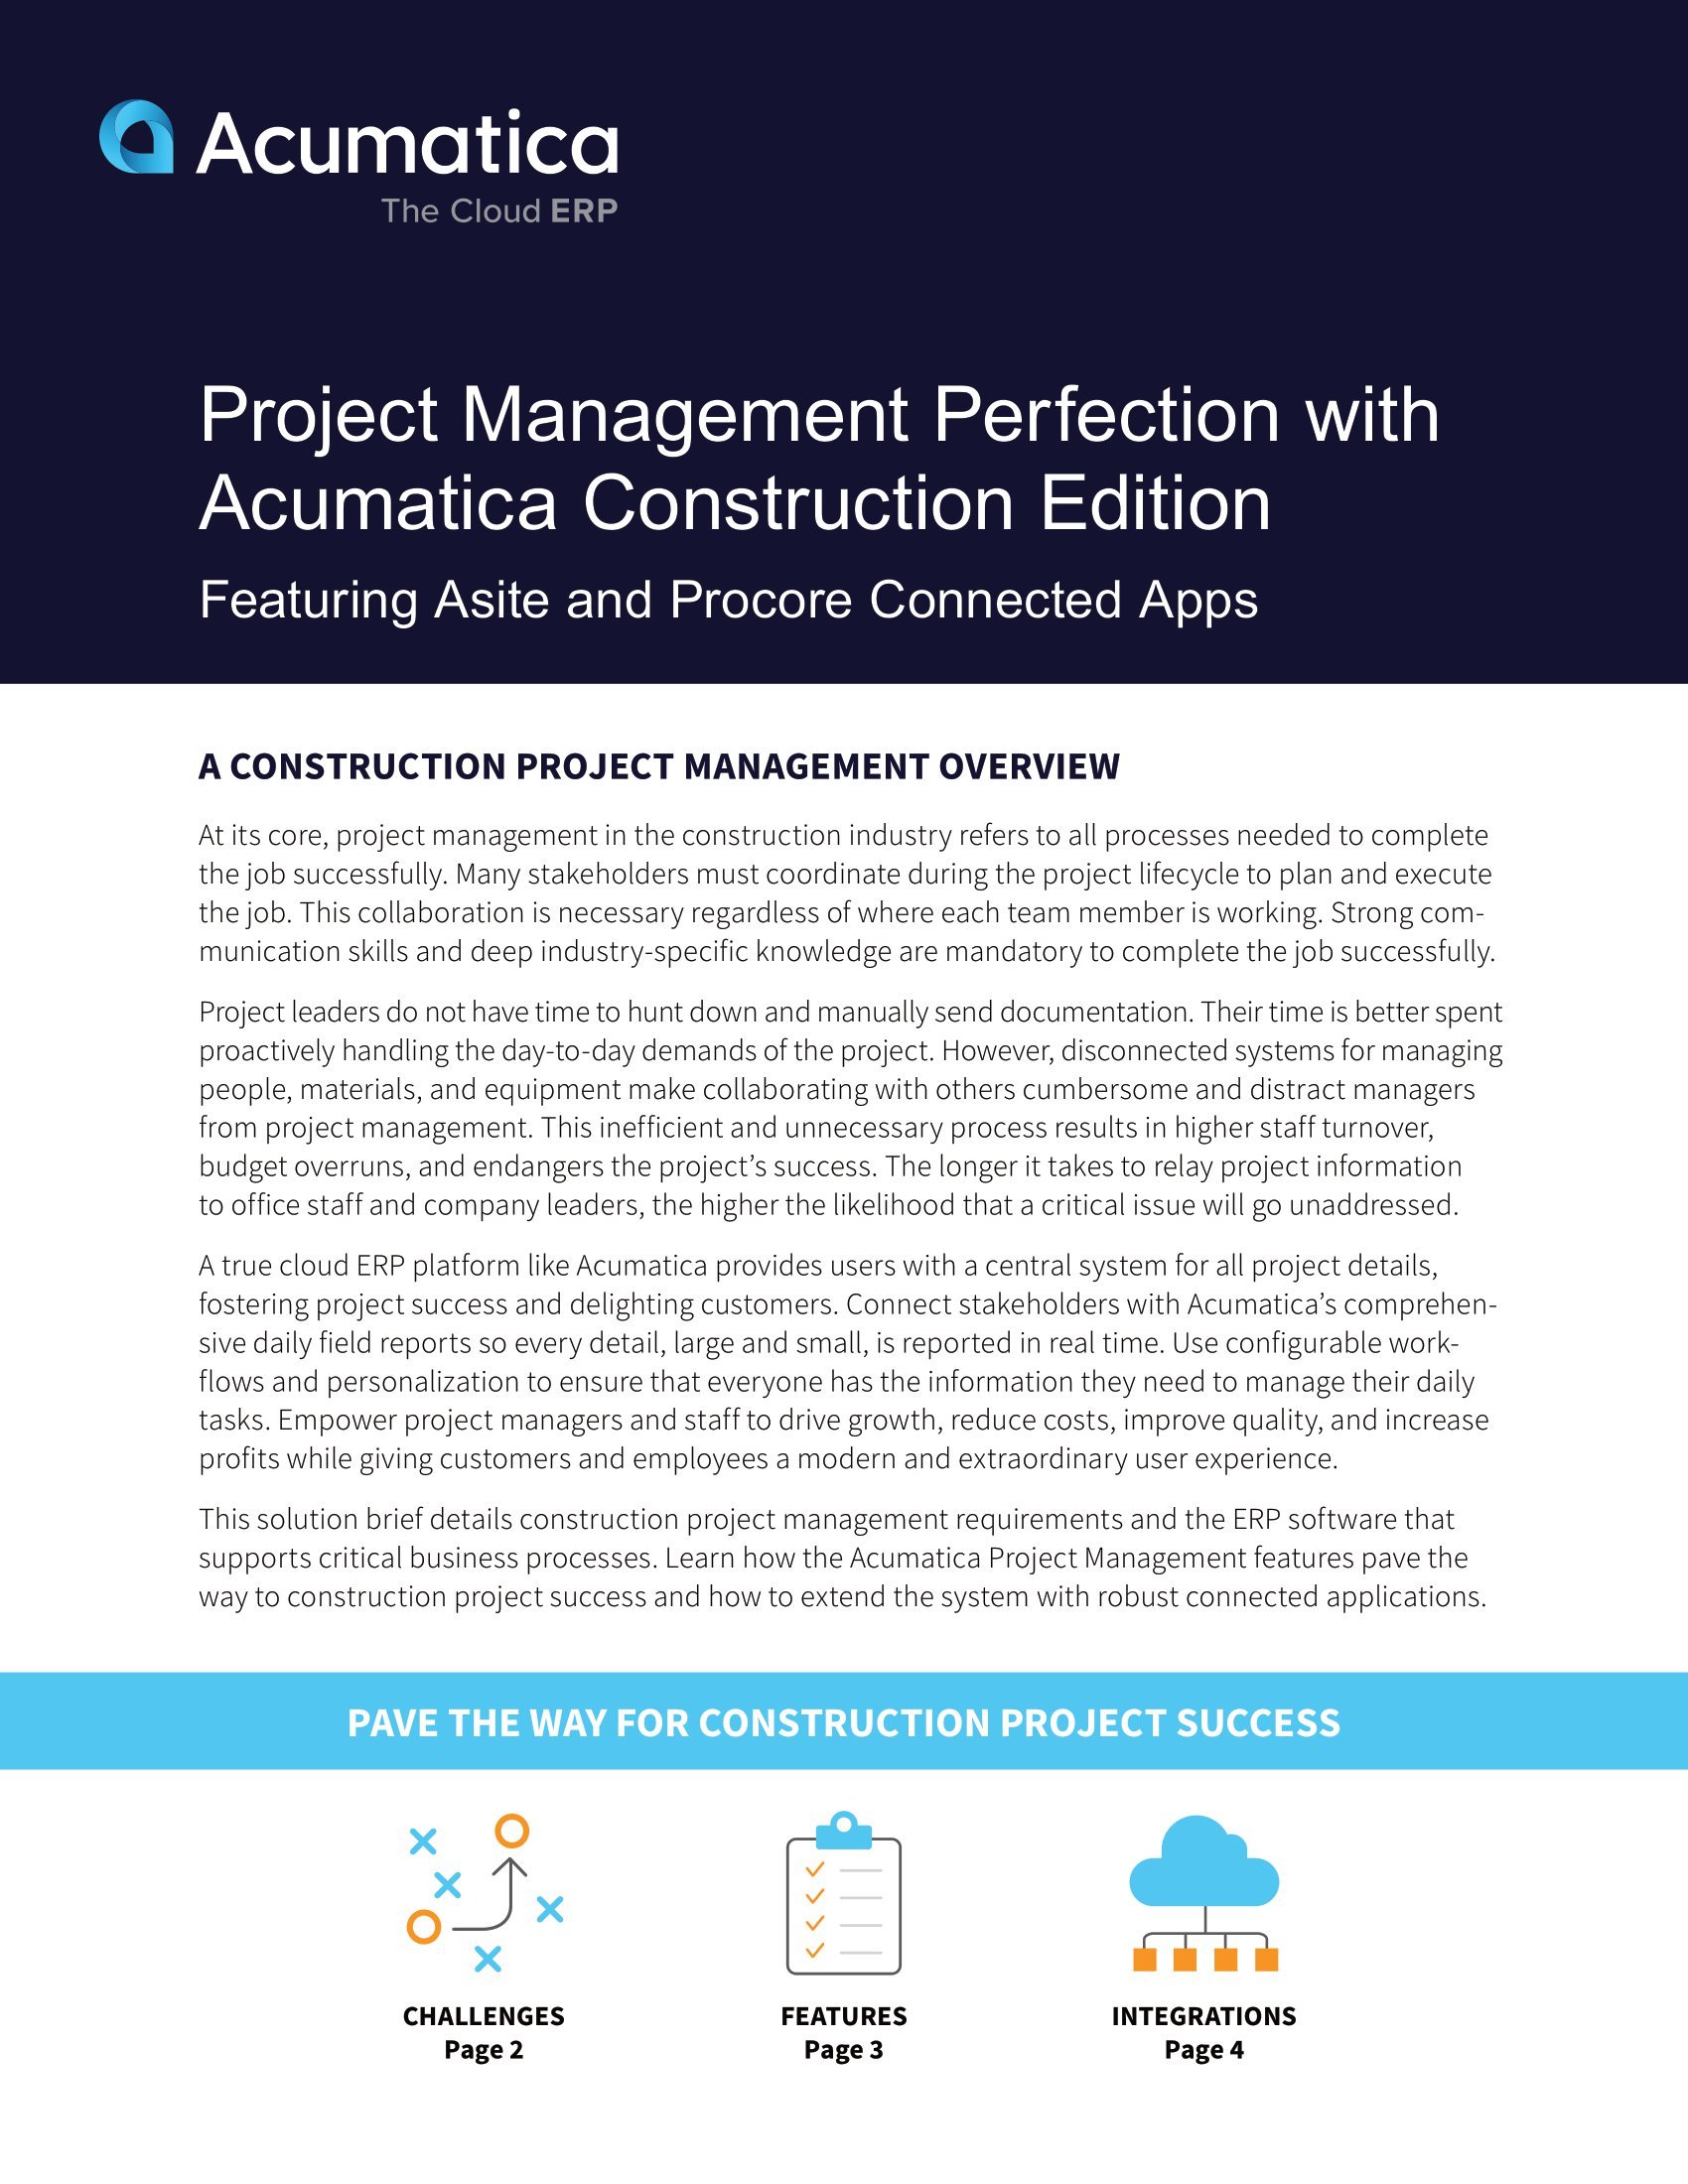 What Do Construction Project Managers Need to Succeed? A Centralized, Extensible System. 